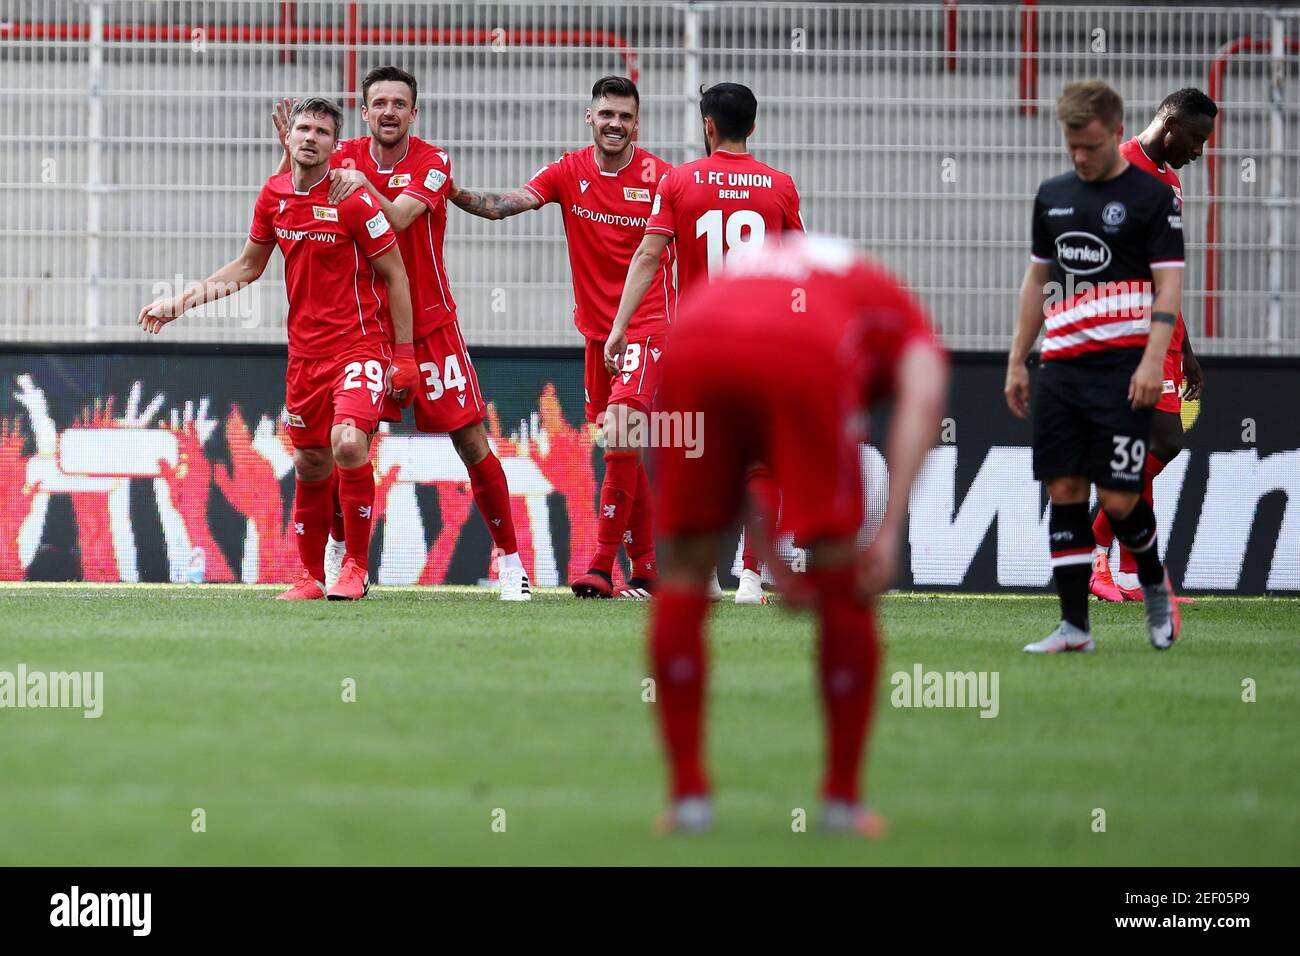 Soccer Football - Bundesliga - 1. FC Union Berlin v Fortuna Dusseldorf - Stadion An der Alten Forsterei, Berlin, Germany - June 27, 2020 Union's Suleiman Abdullahi celebrates scoring their third goal with teammates, following the resumption of play behind closed doors after the outbreak of the coronavirus disease (COVID-19)  Maja Hitij/Pool via REUTERS  DFL regulations prohibit any use of photographs as image sequences and/or quasi-video Stock Photo